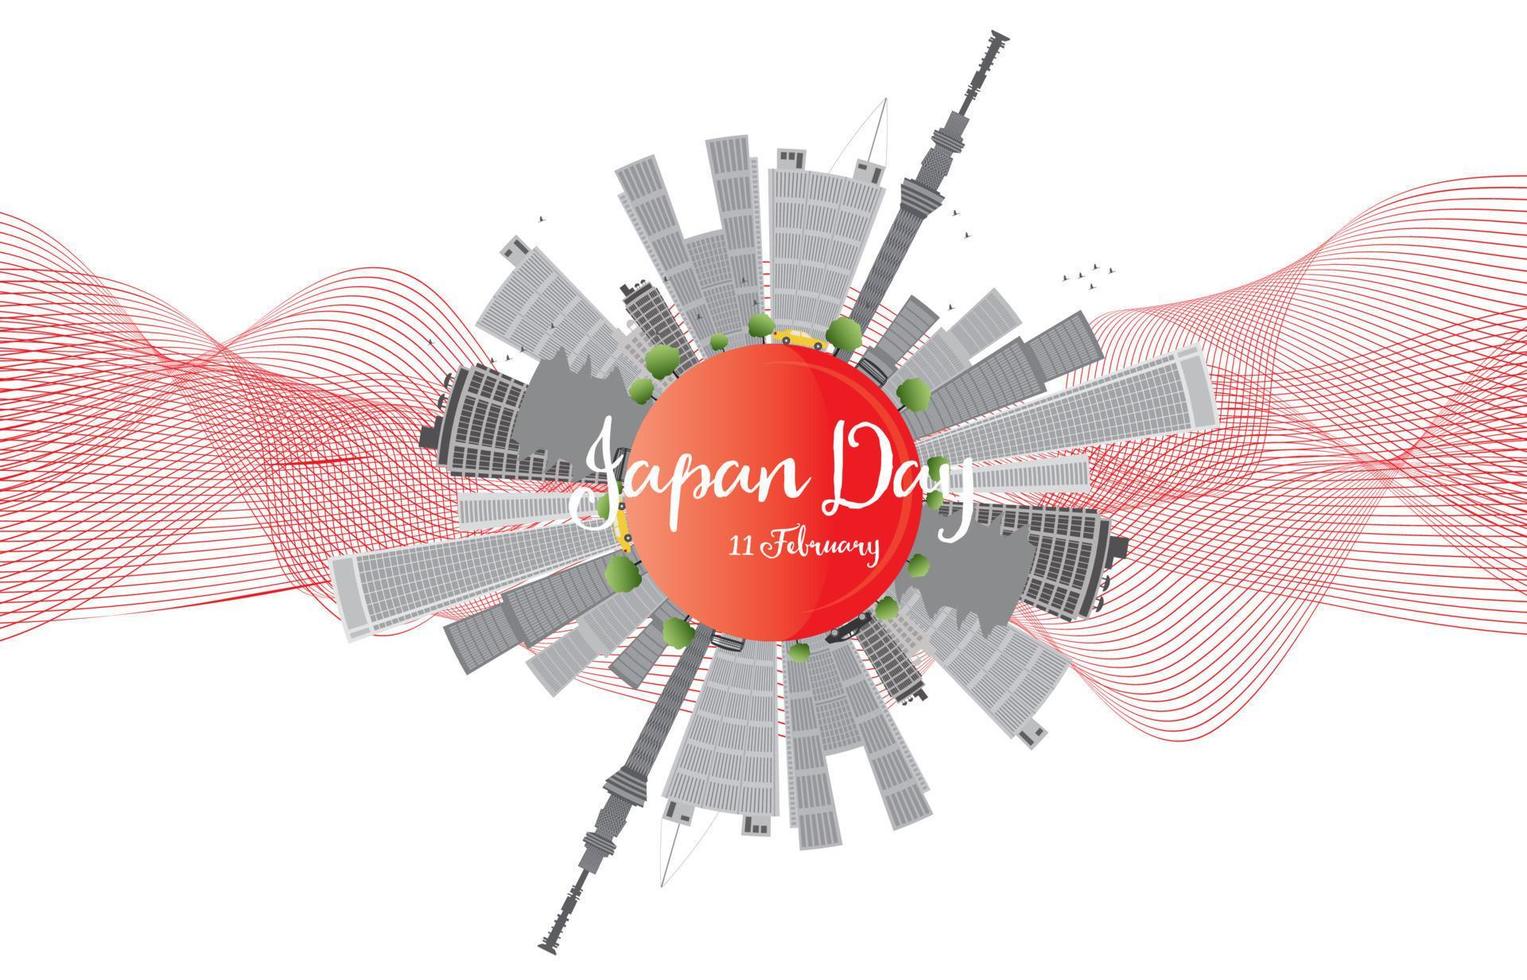 National Day of Japan 11 february. vector